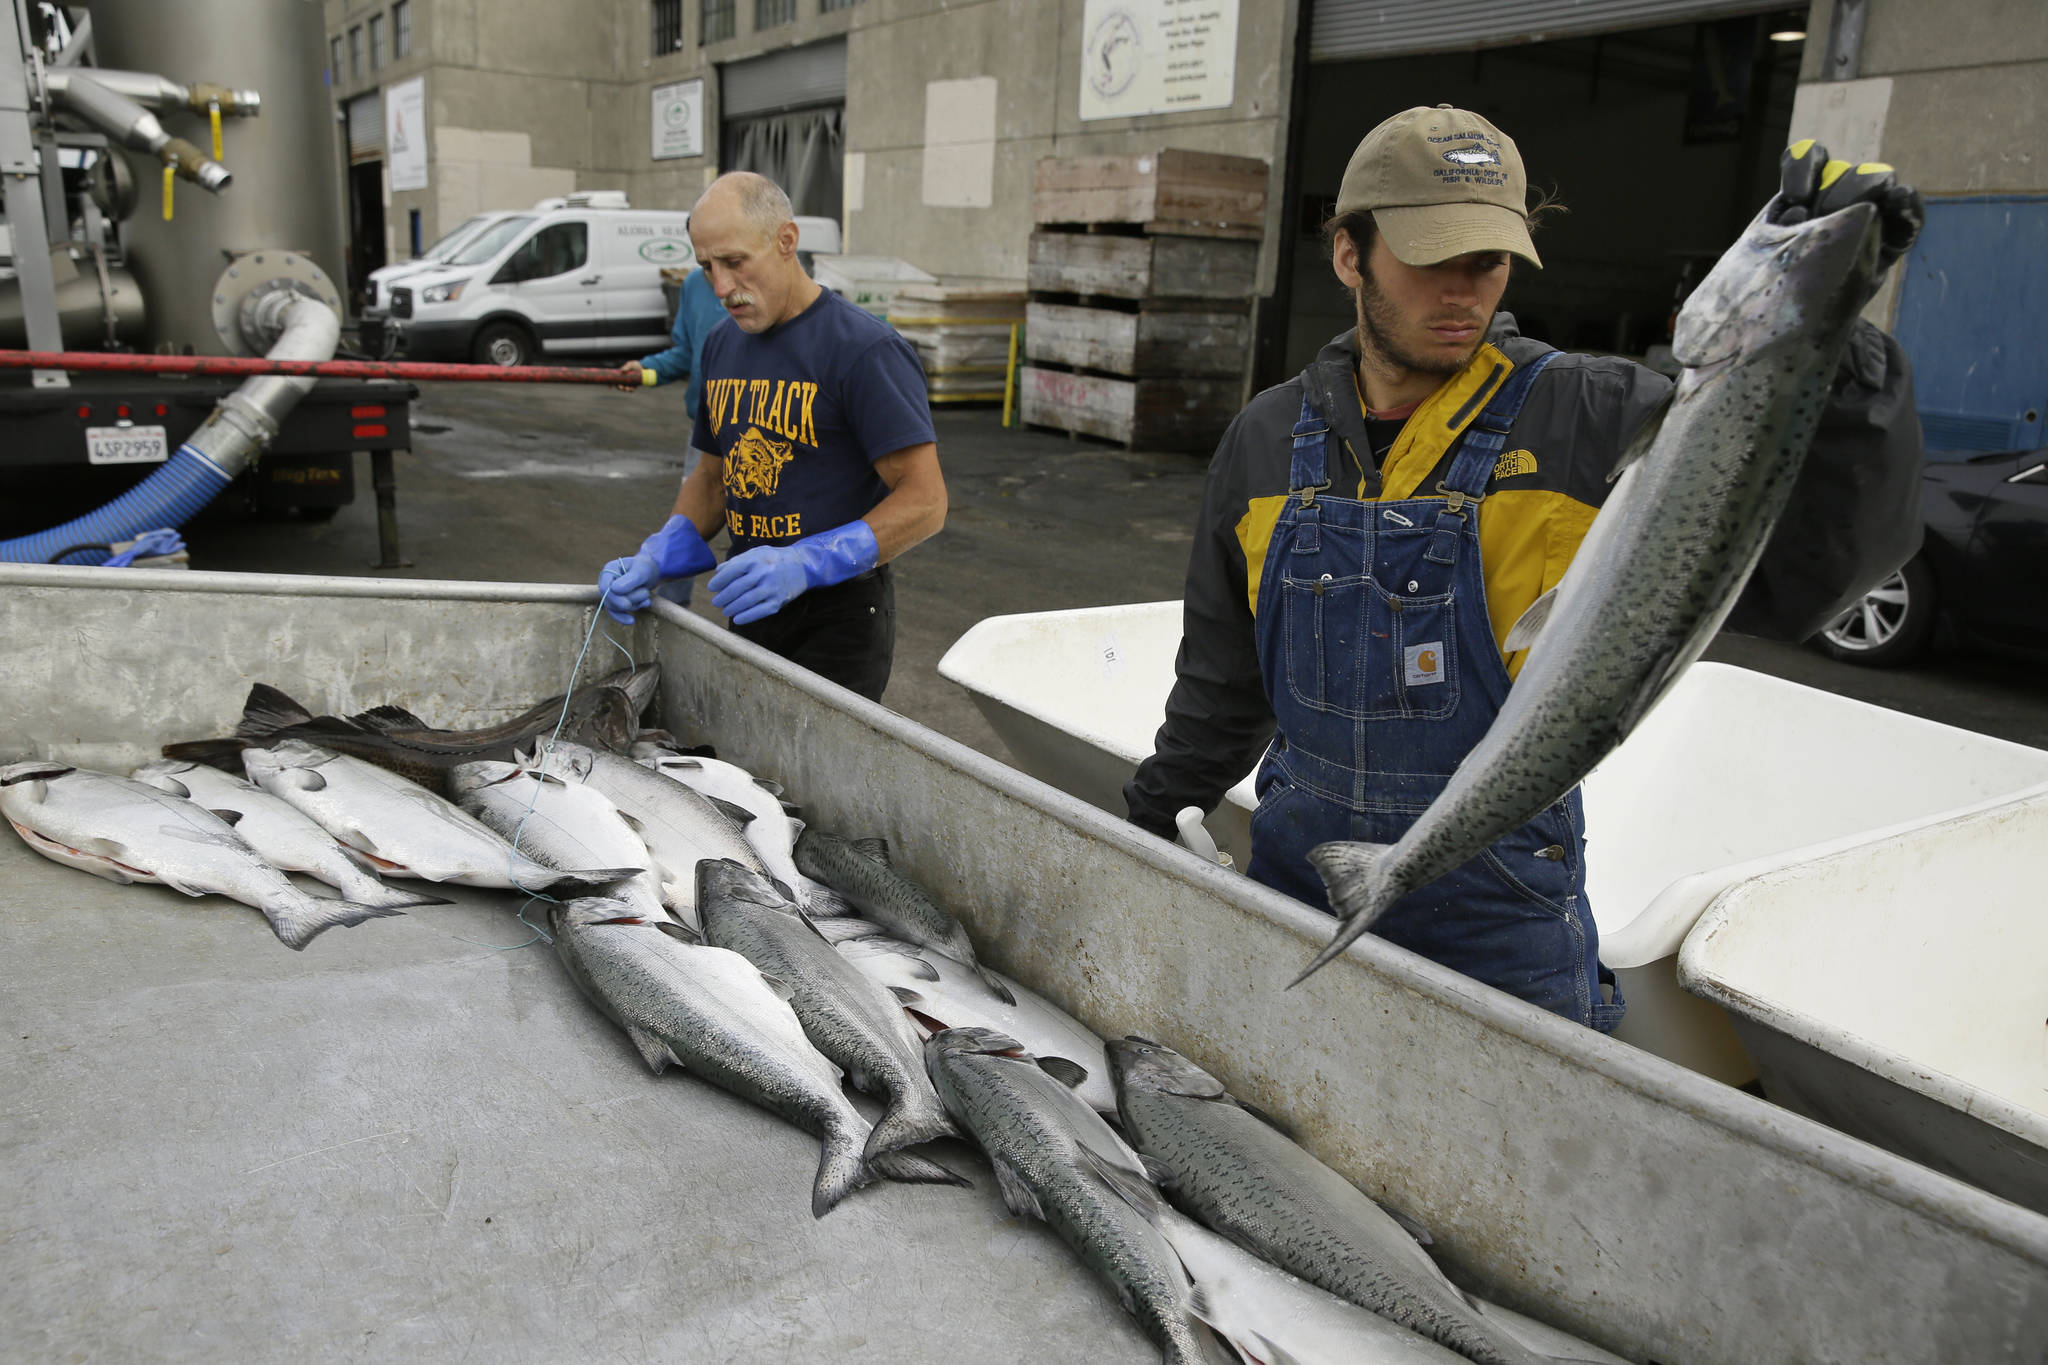 In this photo taken Monday, July 22, 2019, Cooper Campbell, right, with the California Department of Fish and Wildlife, looks for chinook salmon that are from their hatchery project at Fisherman’s Wharf in San Francisco. California fishermen are reporting one of the best salmon fishing seasons in more than a decade, thanks to heavy rain and snow that ended the state’s historic drought. It’s a sharp reversal for chinook salmon, also known as king salmon, an iconic fish that helps sustain many Pacific Coast fishing communities. (AP Photo/Eric Risberg)